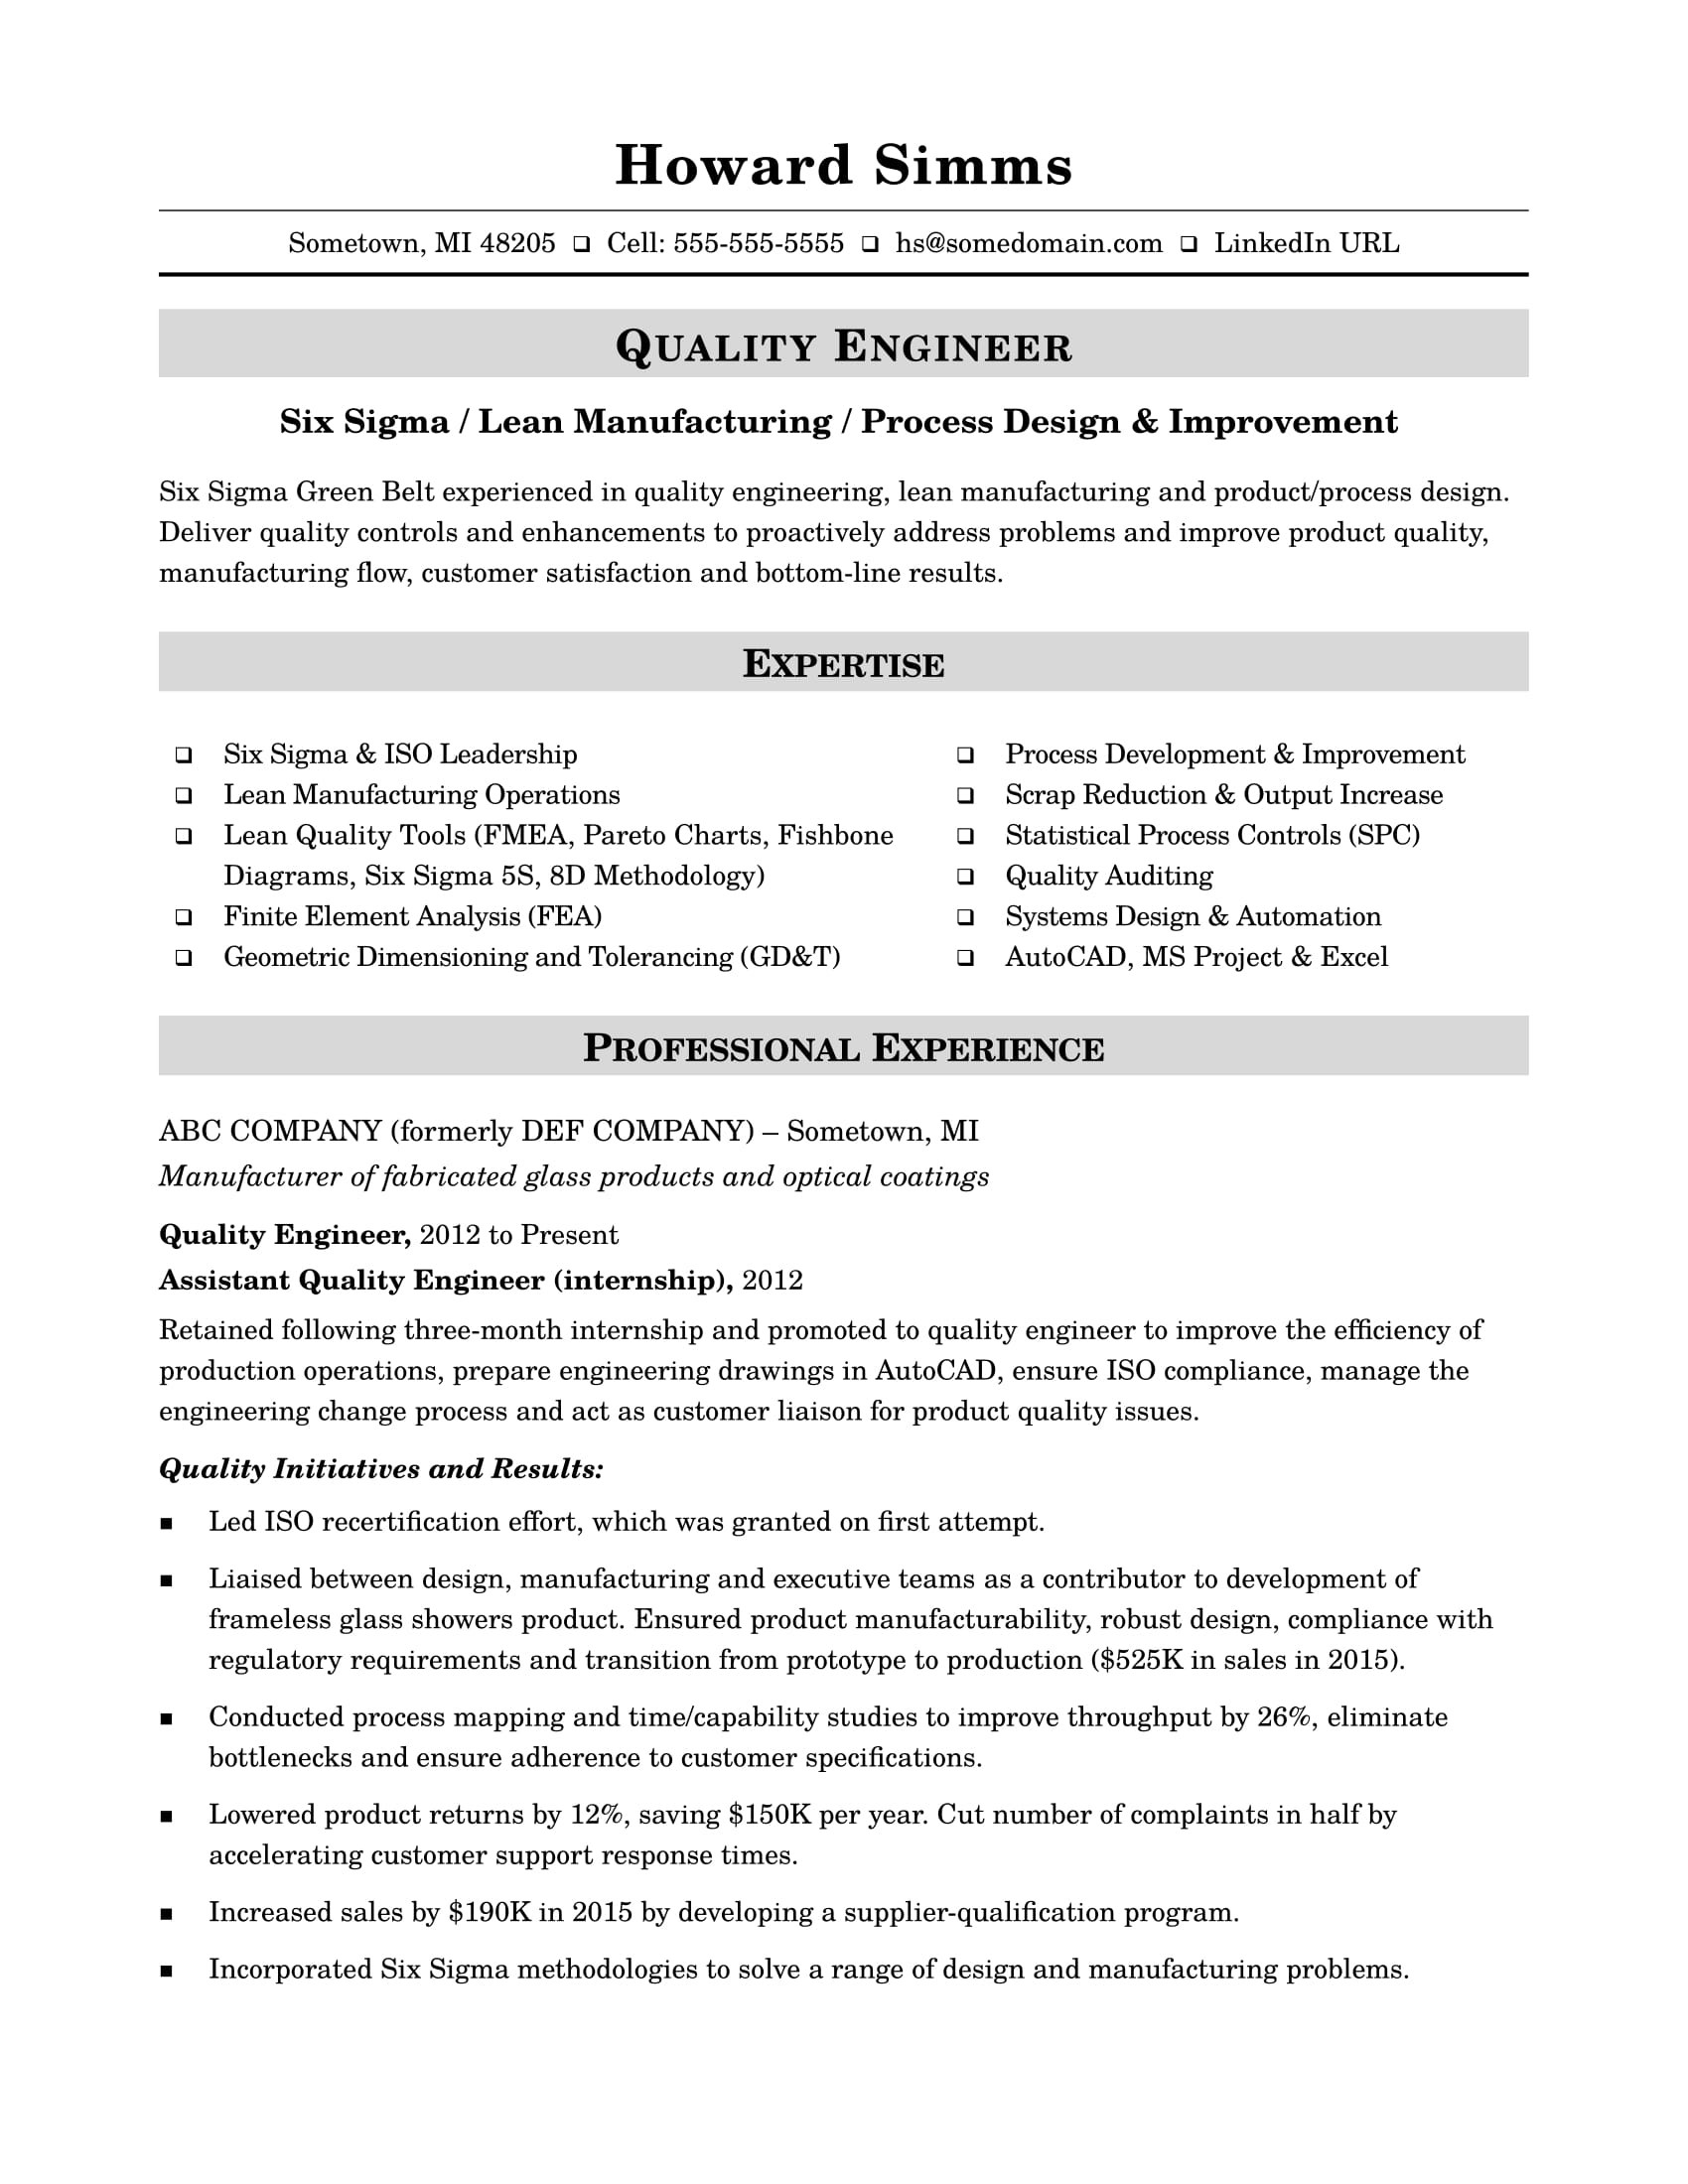 Sample Resume for Production Support Engineer Sample Resume for A Midlevel Quality Engineer Monster.com